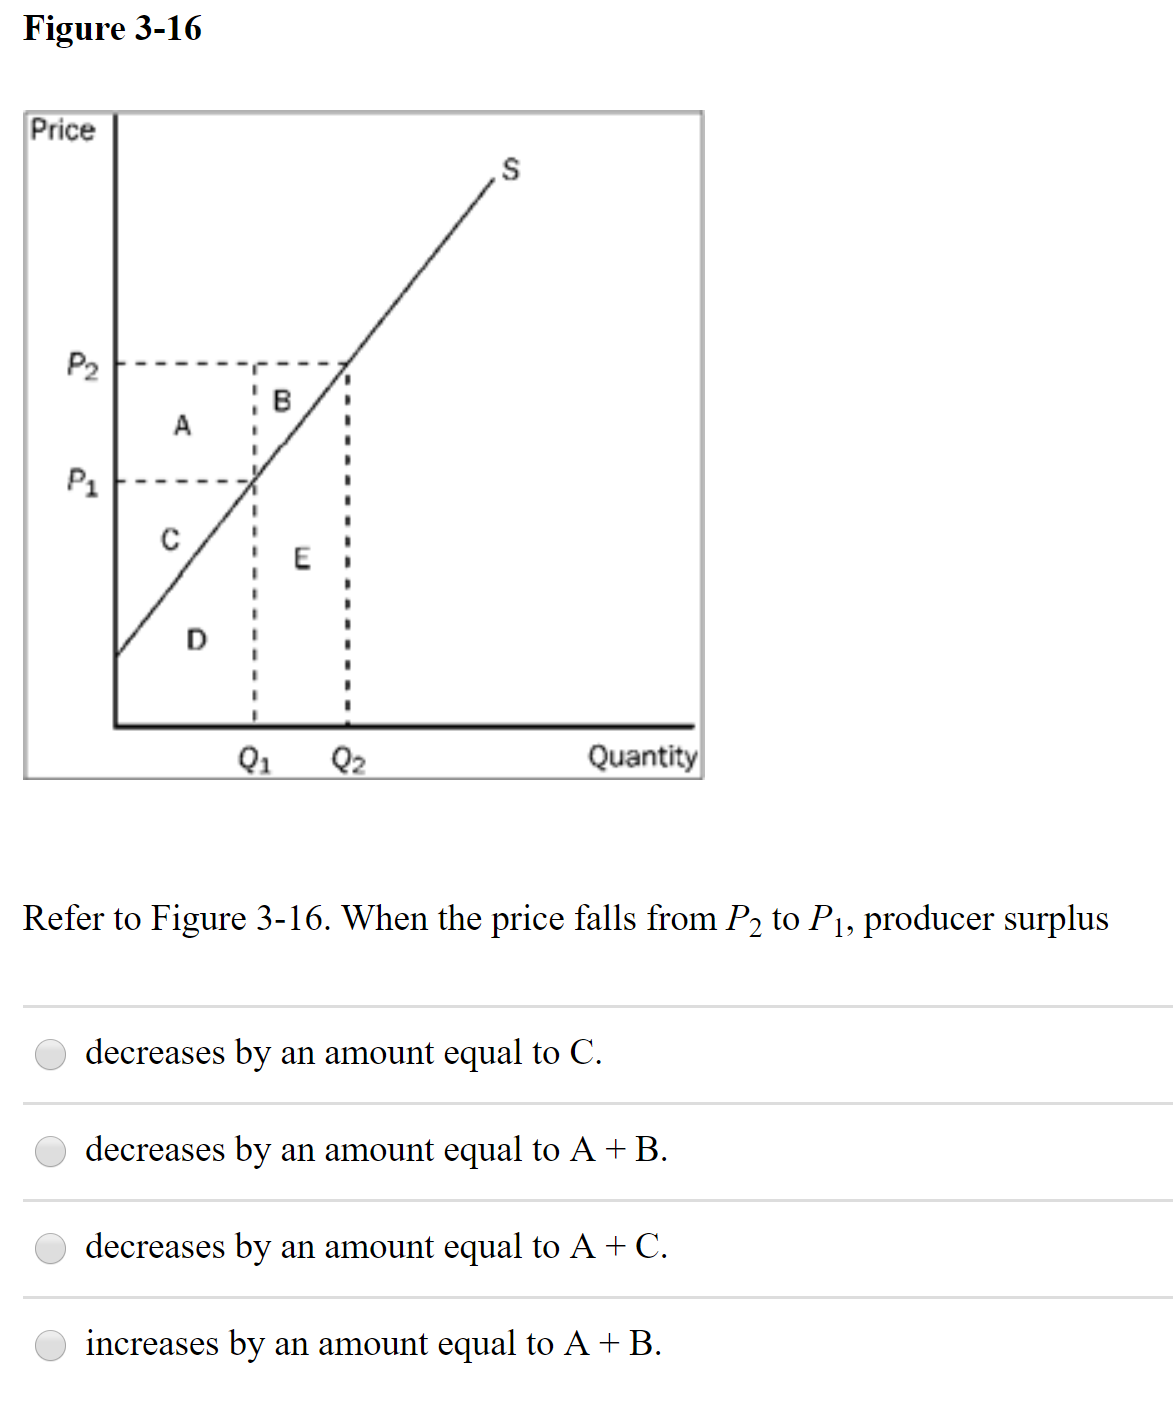 Figure 3-16
Price
P2
A
P1
Q1
Q2
Quantity
Refer to Figure 3-16. When the price falls from P2 to P1, producer surplus
decreases by an amount equal to C.
decreases by an amount equal to A + B.
decreases by an amount equal to A + C.
increases by an amount equal to A + B.
